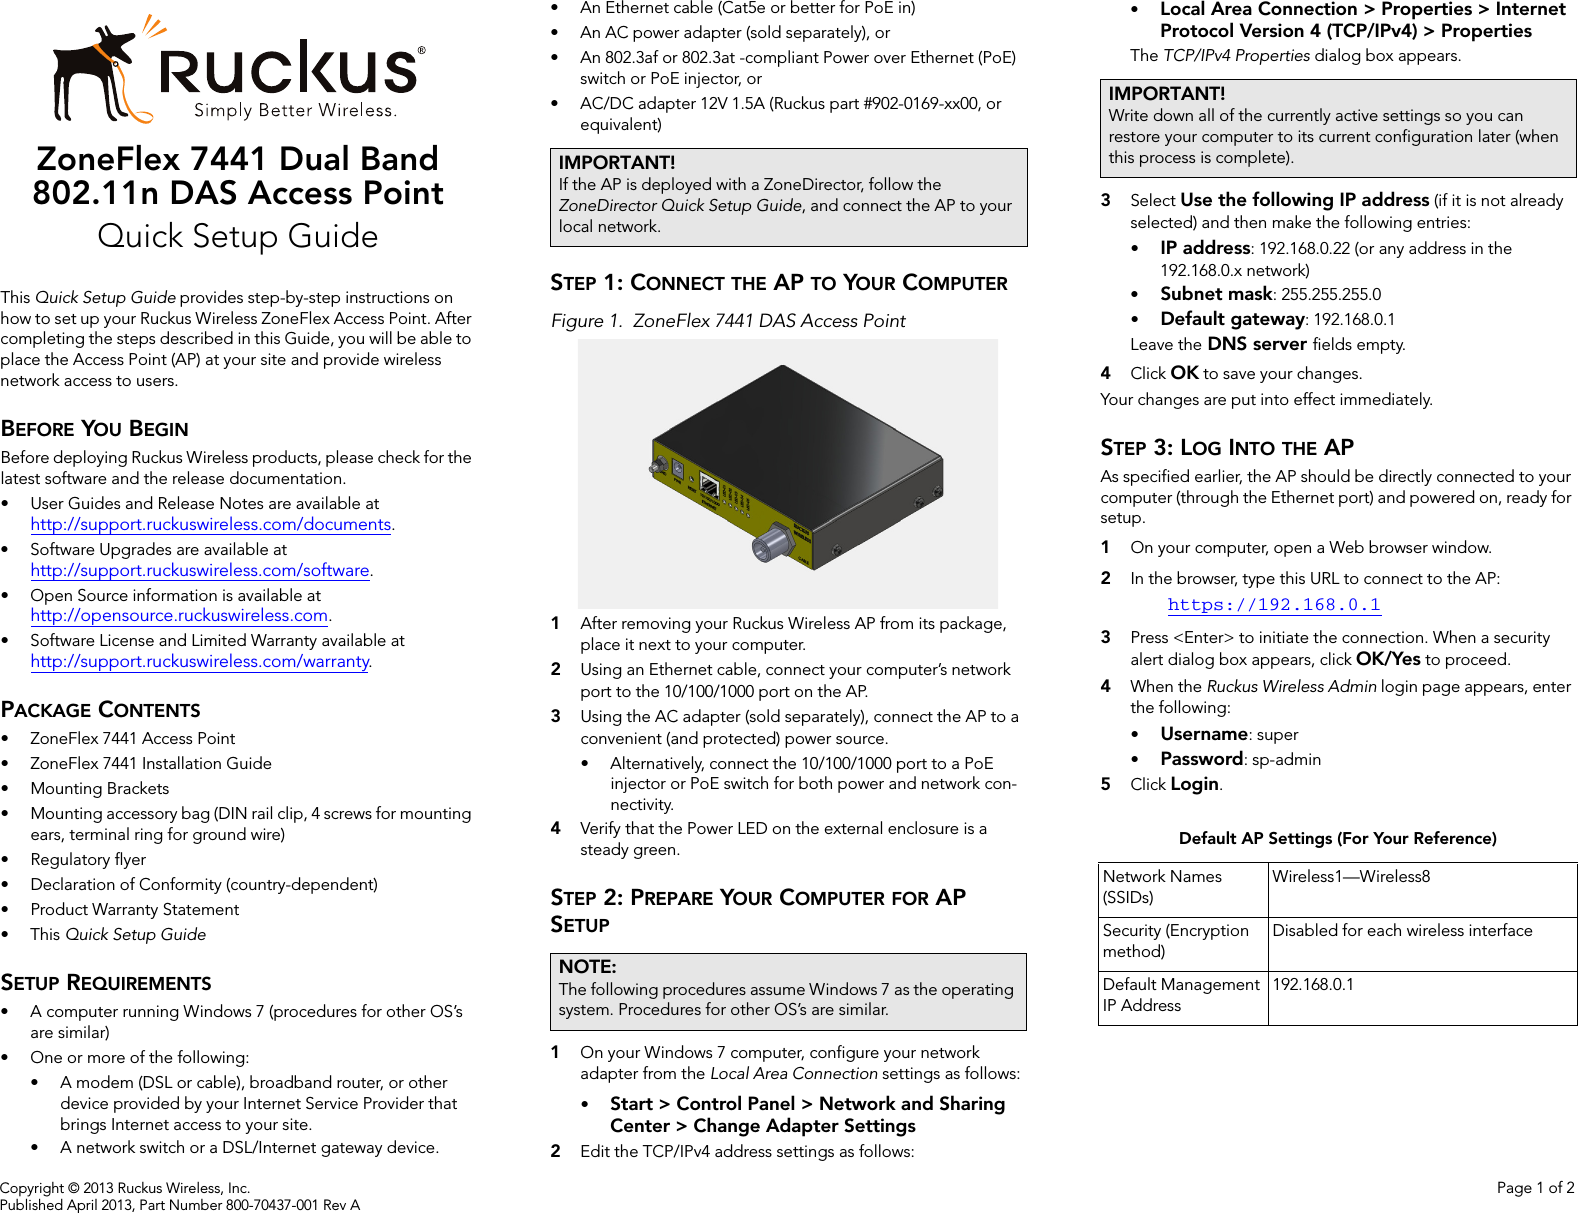 Copyright © 2013 Ruckus Wireless, Inc. Page 1 of 2Published April 2013, Part Number 800-70437-001 Rev AZoneFlex 7441 Dual Band 802.11n DAS Access Point Quick Setup GuideThis Quick Setup Guide provides step-by-step instructions on how to set up your Ruckus Wireless ZoneFlex Access Point. After completing the steps described in this Guide, you will be able to place the Access Point (AP) at your site and provide wireless network access to users.BEFORE YOU BEGINBefore deploying Ruckus Wireless products, please check for the latest software and the release documentation.• User Guides and Release Notes are available at http://support.ruckuswireless.com/documents.• Software Upgrades are available athttp://support.ruckuswireless.com/software.• Open Source information is available athttp://opensource.ruckuswireless.com.• Software License and Limited Warranty available at http://support.ruckuswireless.com/warranty.PACKAGE CONTENTS• ZoneFlex 7441 Access Point• ZoneFlex 7441 Installation Guide• Mounting Brackets• Mounting accessory bag (DIN rail clip, 4 screws for mounting ears, terminal ring for ground wire)• Regulatory flyer• Declaration of Conformity (country-dependent)• Product Warranty Statement•This Quick Setup GuideSETUP REQUIREMENTS• A computer running Windows 7 (procedures for other OS’s are similar)• One or more of the following:• A modem (DSL or cable), broadband router, or other device provided by your Internet Service Provider that brings Internet access to your site. • A network switch or a DSL/Internet gateway device.• An Ethernet cable (Cat5e or better for PoE in)• An AC power adapter (sold separately), or• An 802.3af or 802.3at -compliant Power over Ethernet (PoE) switch or PoE injector, or• AC/DC adapter 12V 1.5A (Ruckus part #902-0169-xx00, or equivalent)STEP 1: CONNECT THE AP TO YOUR COMPUTERFigure 1. ZoneFlex 7441 DAS Access Point1After removing your Ruckus Wireless AP from its package, place it next to your computer.2Using an Ethernet cable, connect your computer’s network port to the 10/100/1000 port on the AP. 3Using the AC adapter (sold separately), connect the AP to a convenient (and protected) power source. • Alternatively, connect the 10/100/1000 port to a PoE injector or PoE switch for both power and network con-nectivity.4Verify that the Power LED on the external enclosure is a steady green. STEP 2: PREPARE YOUR COMPUTER FOR AP SETUP1On your Windows 7 computer, configure your network adapter from the Local Area Connection settings as follows:•Start &gt; Control Panel &gt; Network and Sharing Center &gt; Change Adapter Settings2Edit the TCP/IPv4 address settings as follows: •Local Area Connection &gt; Properties &gt; Internet Protocol Version 4 (TCP/IPv4) &gt; PropertiesThe TCP/IPv4 Properties dialog box appears.3Select Use the following IP address (if it is not already selected) and then make the following entries:•IP address: 192.168.0.22 (or any address in the 192.168.0.x network)•Subnet mask: 255.255.255.0•Default gateway: 192.168.0.1Leave the DNS server fields empty.4Click OK to save your changes.Your changes are put into effect immediately. STEP 3: LOG INTO THE APAs specified earlier, the AP should be directly connected to your computer (through the Ethernet port) and powered on, ready for setup.1On your computer, open a Web browser window.2In the browser, type this URL to connect to the AP: https://192.168.0.13Press &lt;Enter&gt; to initiate the connection. When a security alert dialog box appears, click OK/Yes to proceed.4When the Ruckus Wireless Admin login page appears, enter the following: •Username: super•Password: sp-admin5Click Login.IMPORTANT!If the AP is deployed with a ZoneDirector, follow the ZoneDirector Quick Setup Guide, and connect the AP to your local network.NOTE:The following procedures assume Windows 7 as the operating system. Procedures for other OS’s are similar.IMPORTANT!Write down all of the currently active settings so you can restore your computer to its current configuration later (when this process is complete).Default AP Settings (For Your Reference)Network Names (SSIDs)Wireless1—Wireless8Security (Encryption method)Disabled for each wireless interfaceDefault Management IP Address192.168.0.1